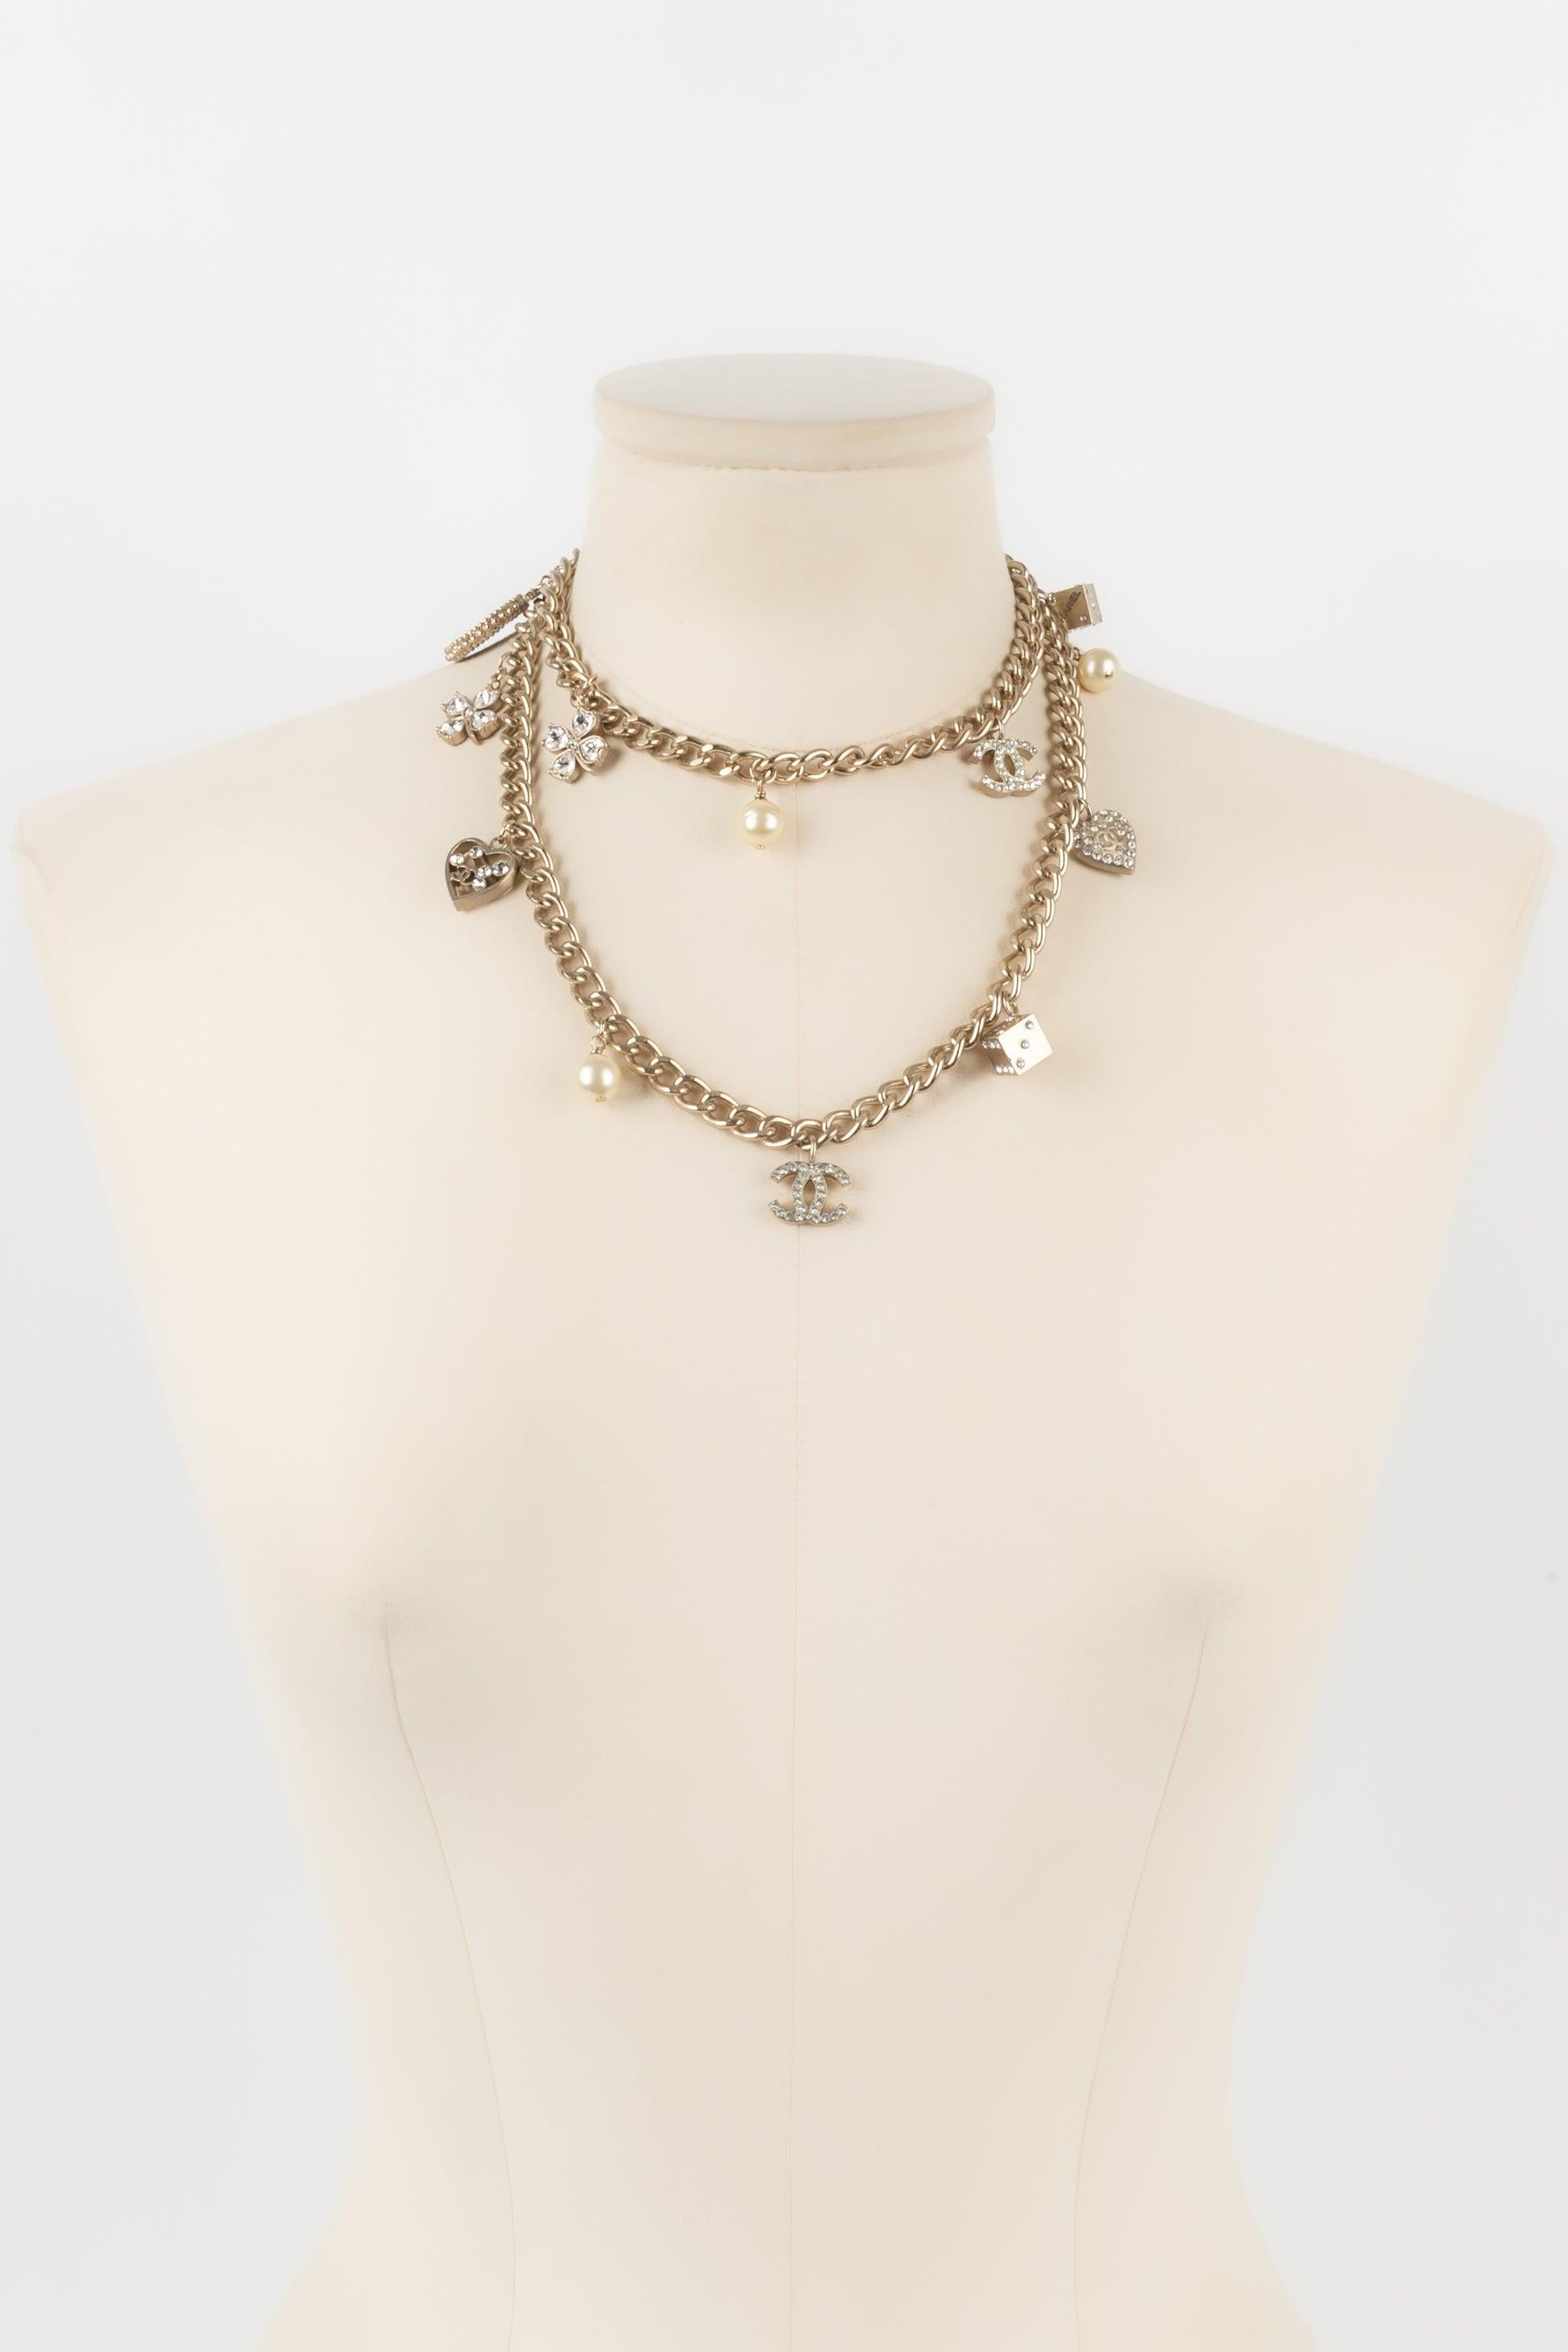 Women's Chanel Silvery Metal Necklace Ornamented with Charms and Rhinestones, Fall 2005 For Sale